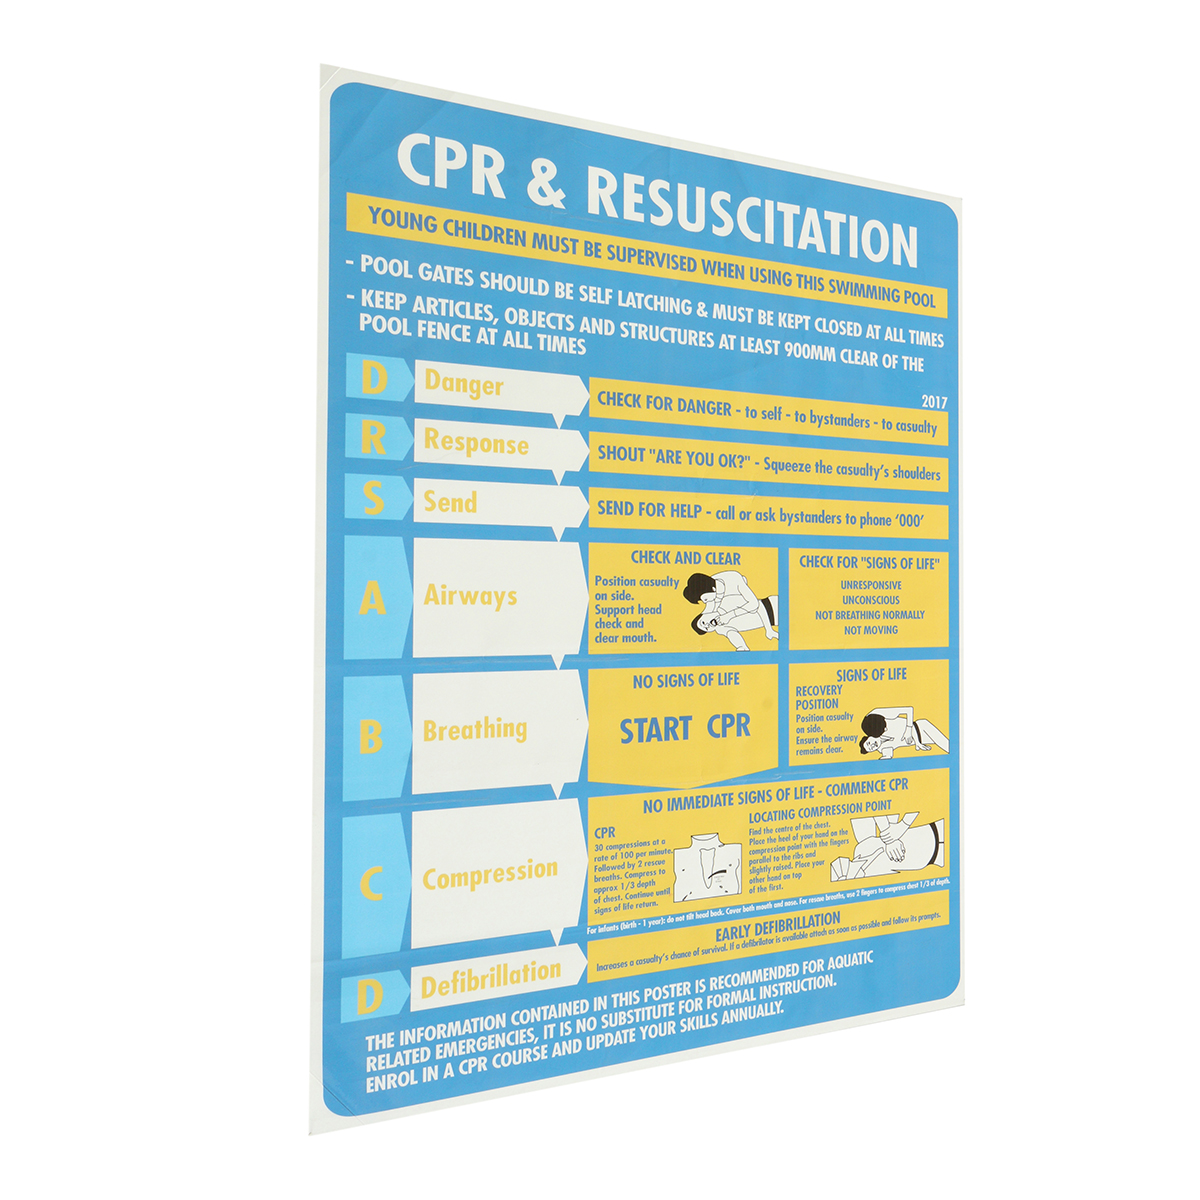 600x400mm-Plastic-CPR--Resuscitation-Chart-DRSABC-Pool-Spa-Safety-Sign-Wall-Sticker-1405988-3